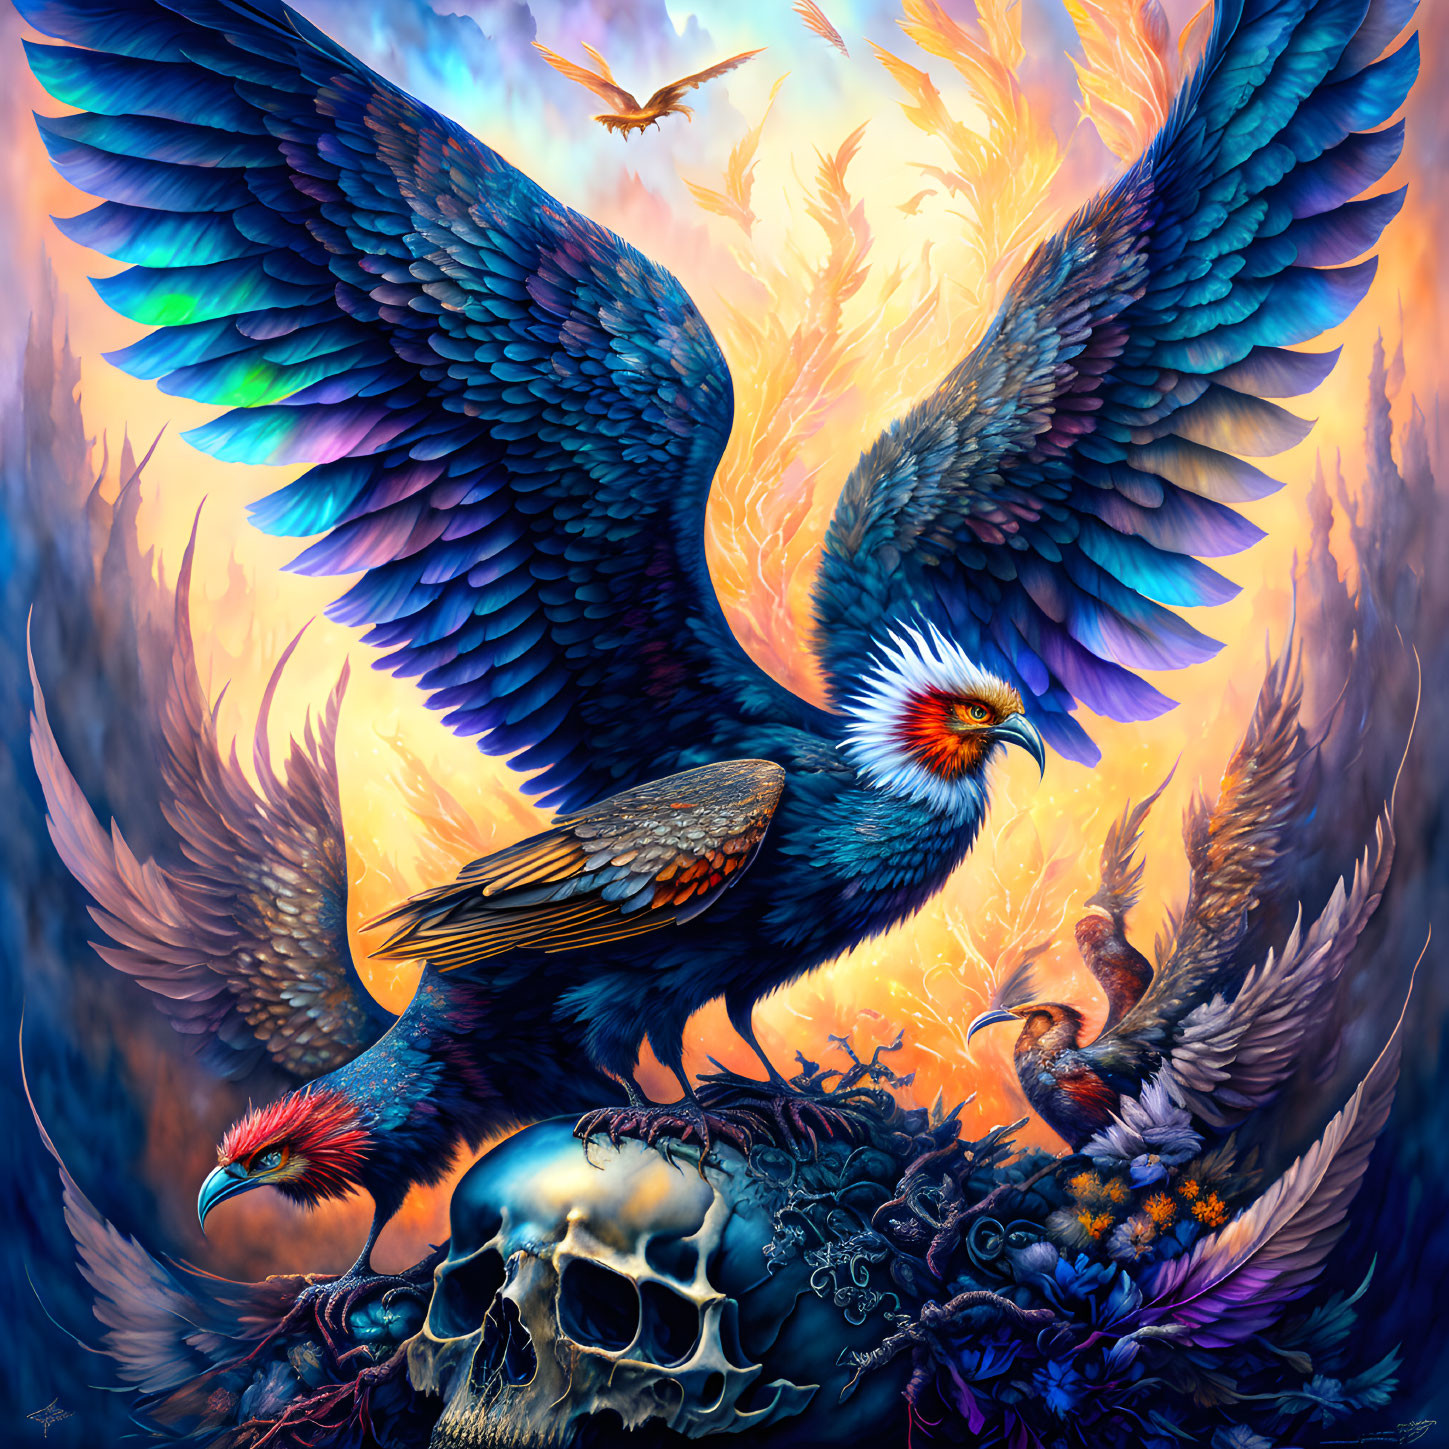 Mythical phoenix birds with iridescent feathers in fiery scene